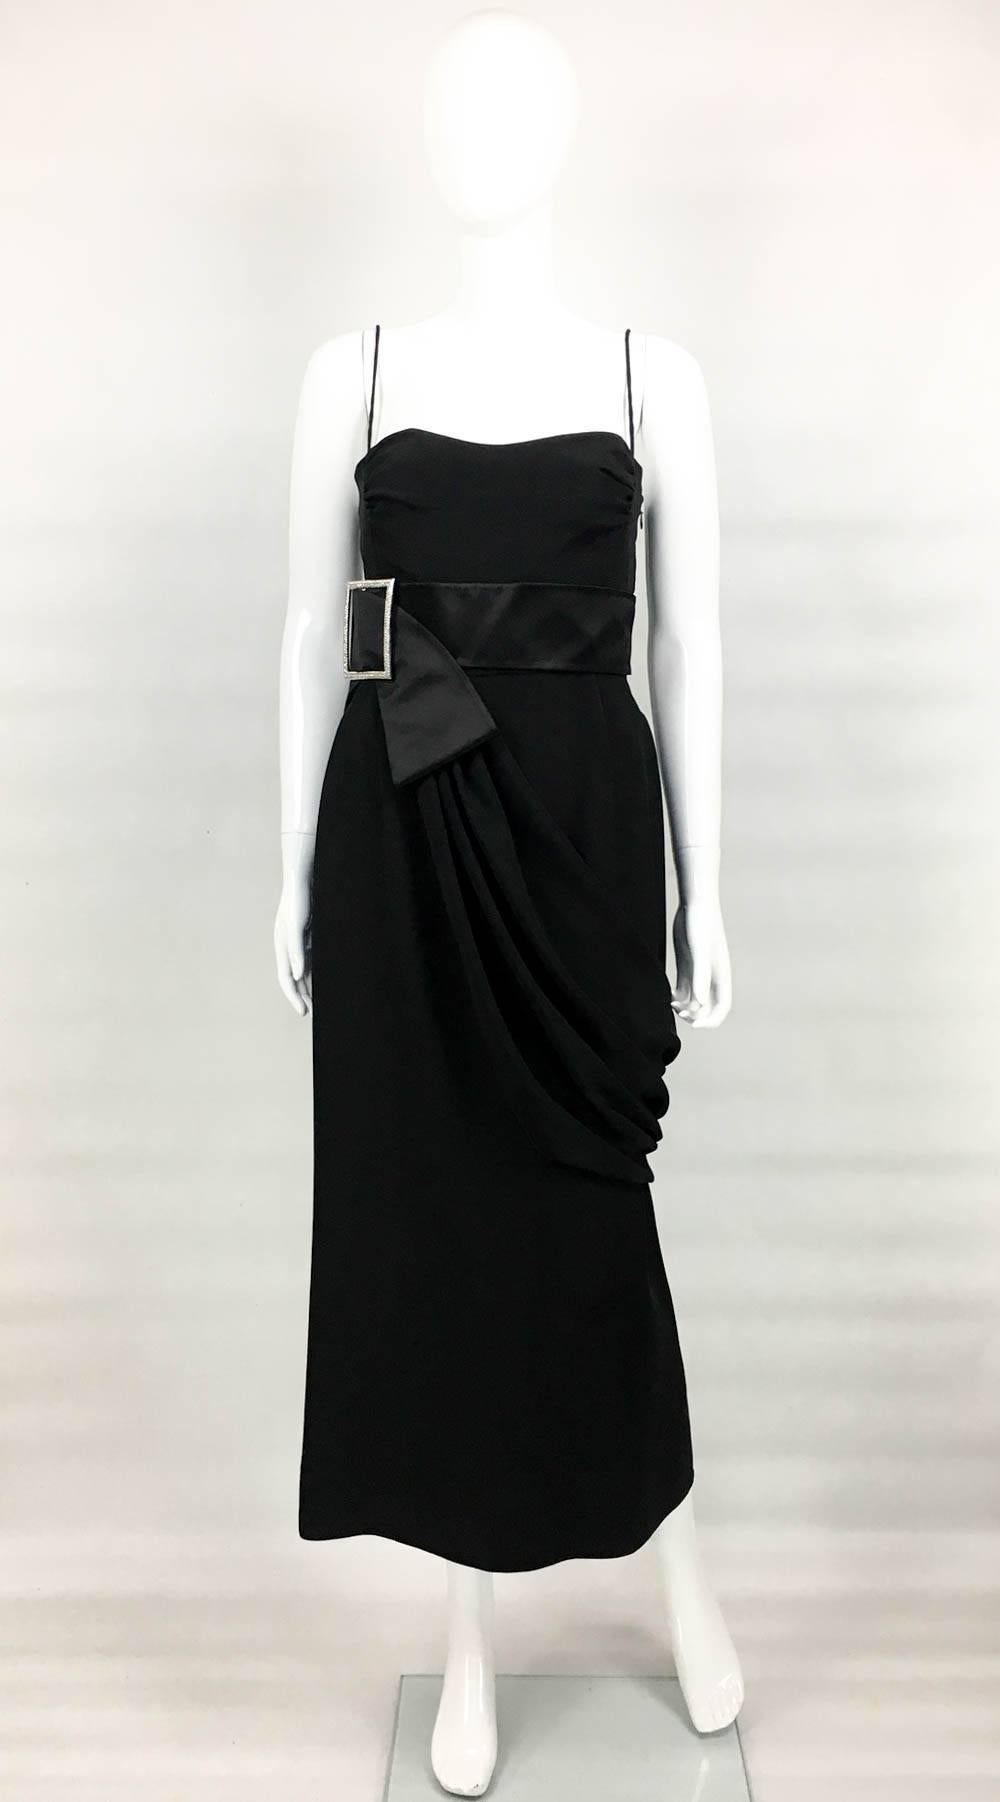 Chic Valentino Evening Dress. This stunning silk-blend dress by Valentino features a silver buckle with diamanté details on a satin sash and draping from the waist. It has an invisible side zipper and it is lined from the waist up. The silhouette